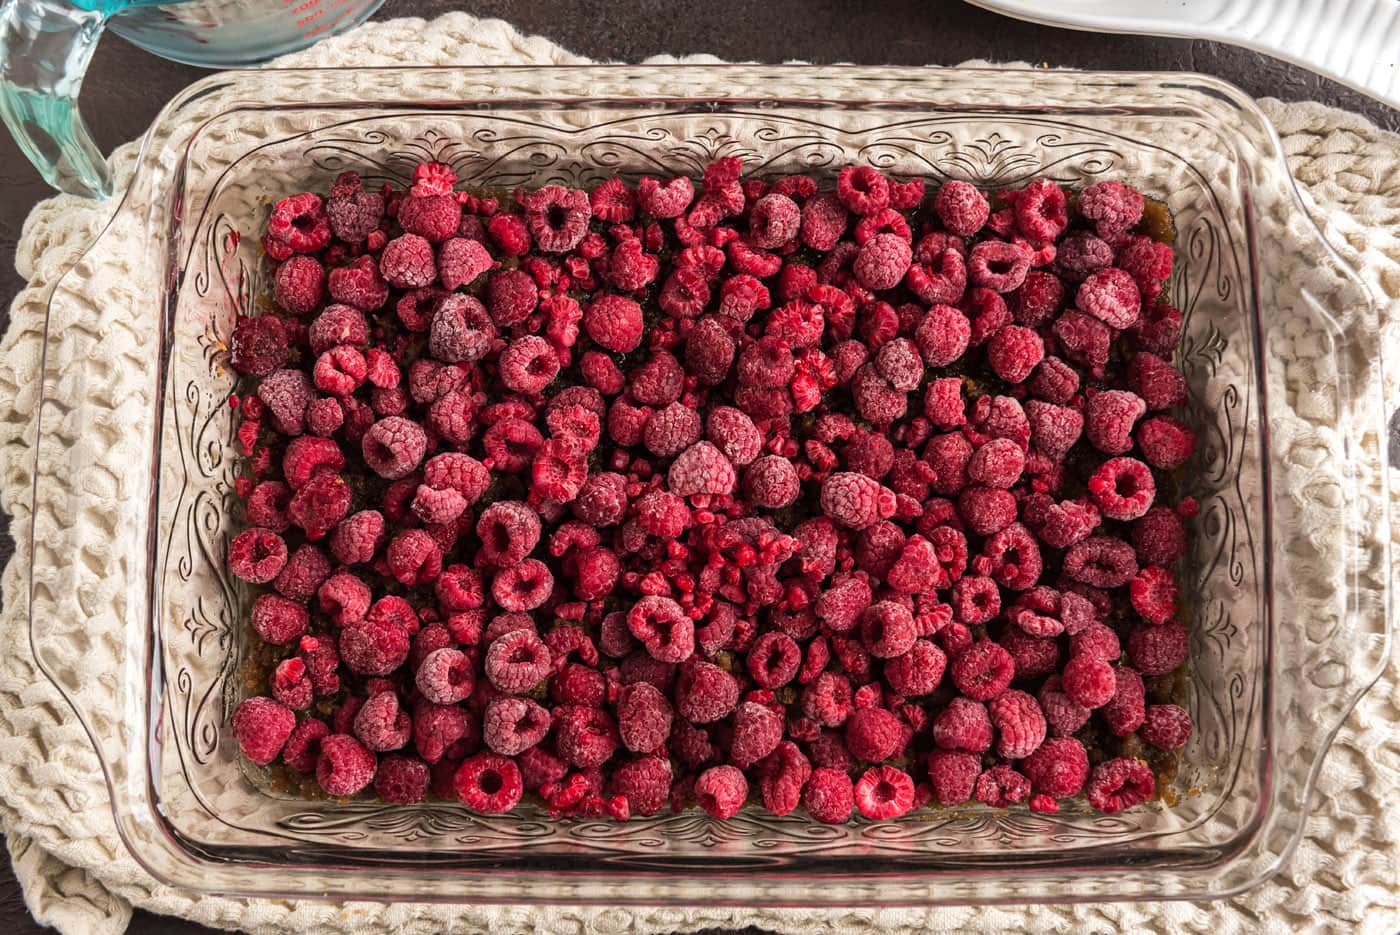 raspberries on top of brown sugar butter mix